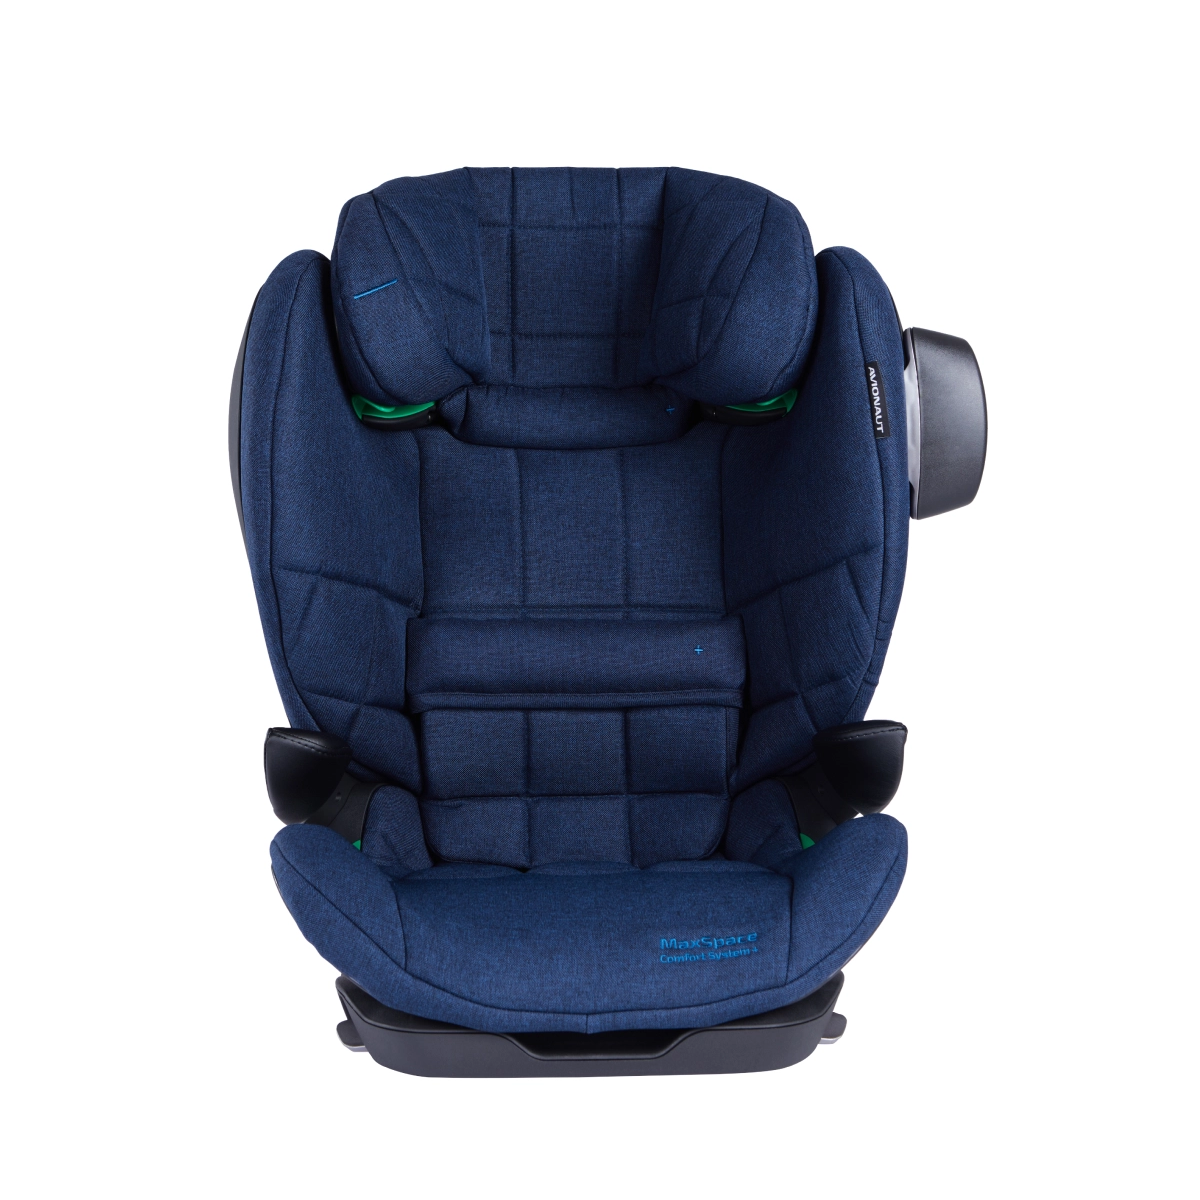 Avionaut MaxSpace Comfort System+ Group 2/3 Car Seat in Navy